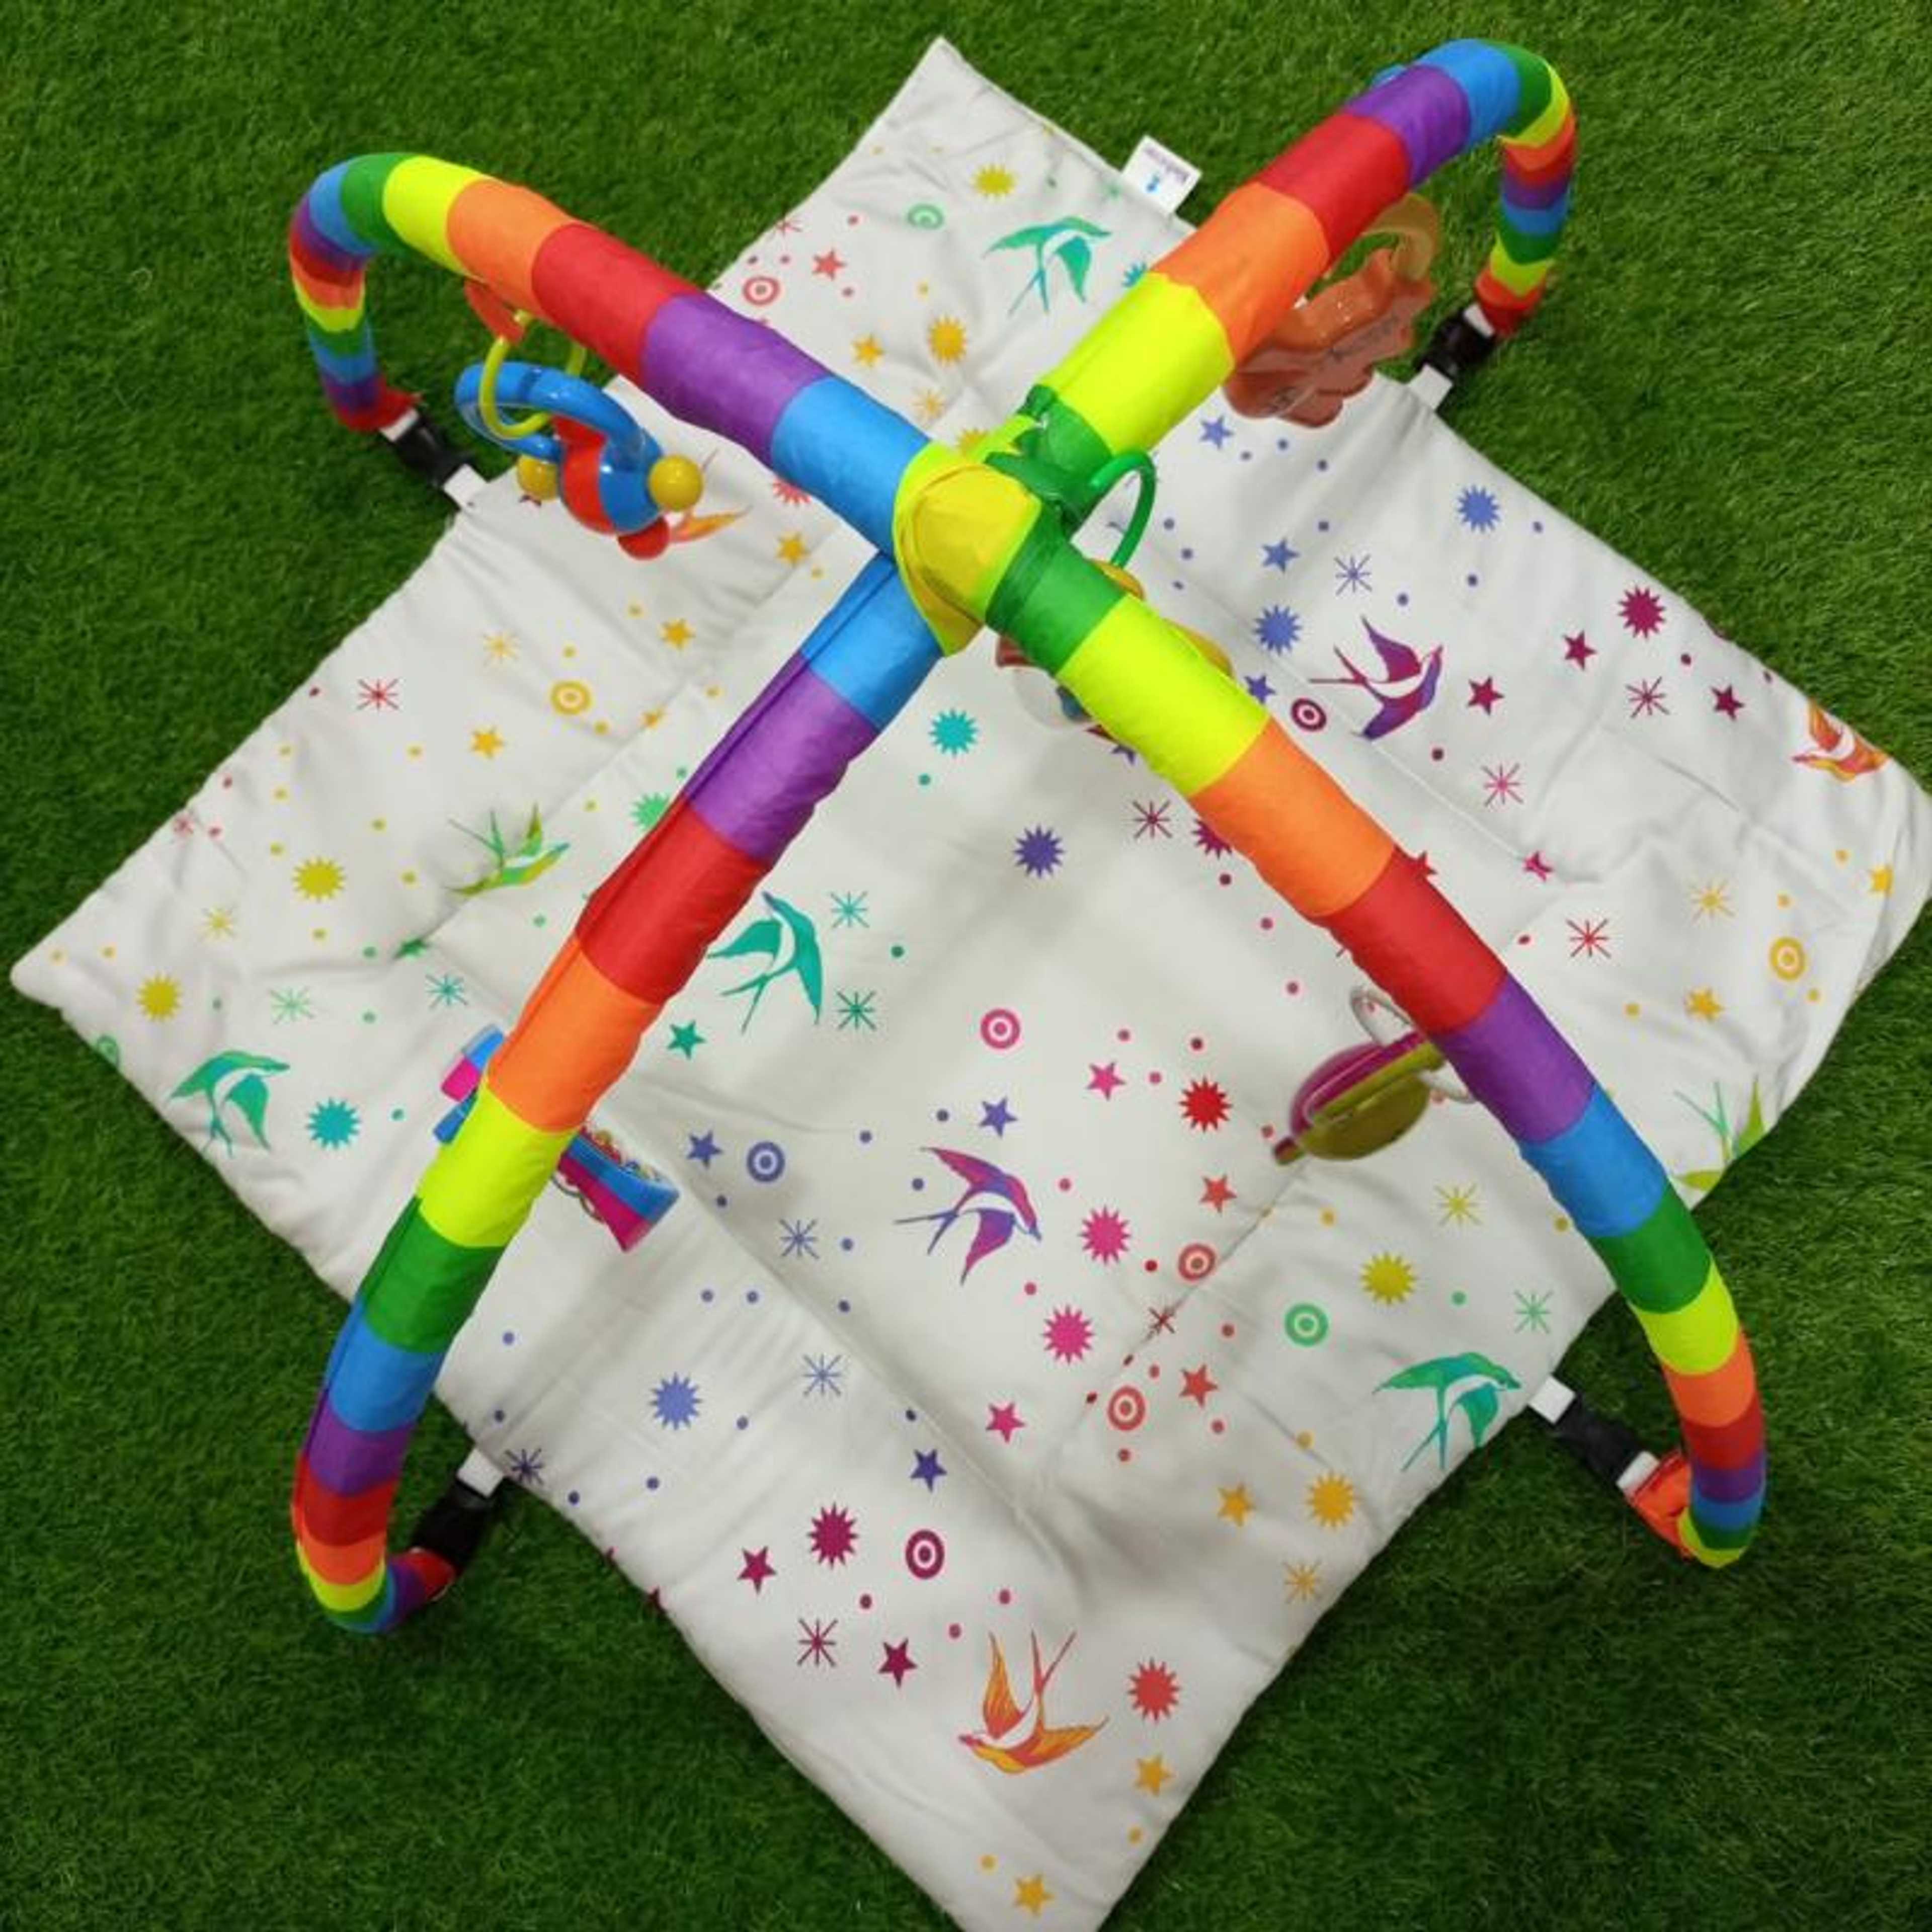 Baby Play Gym Mat, Tummy Time Activity Mat with Detachable Toys